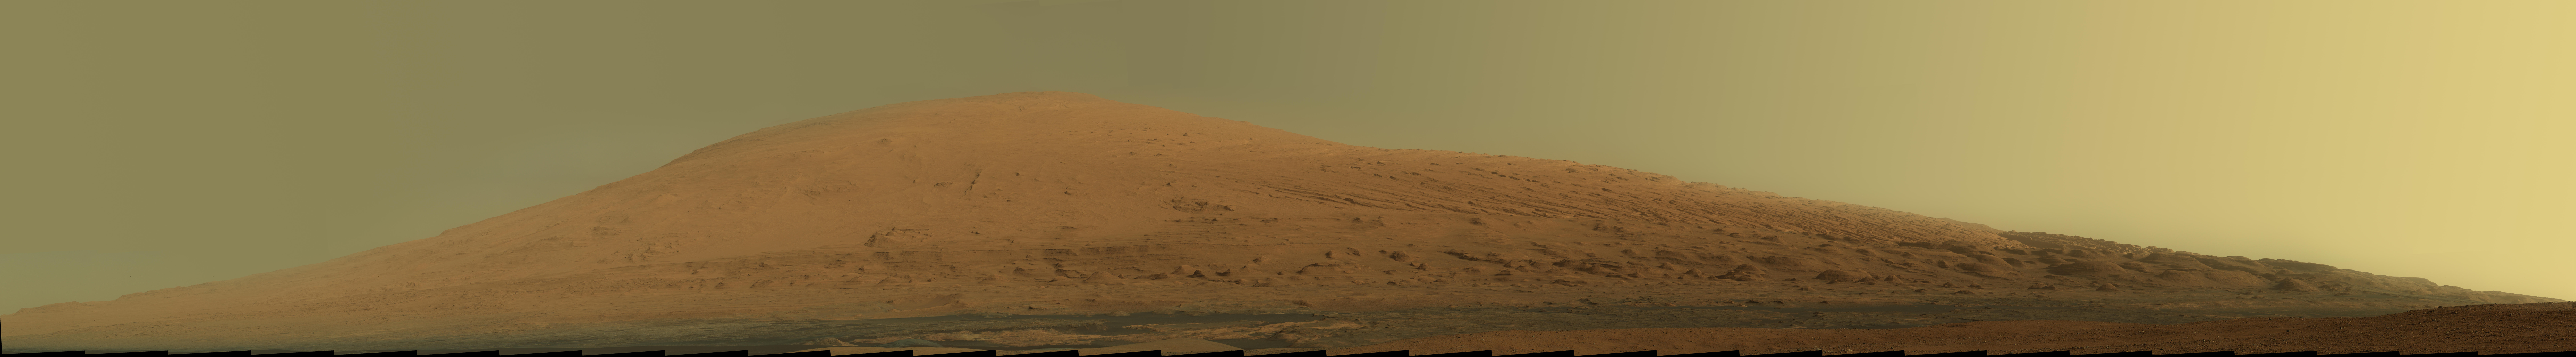 Mount Sharp Panorama in Raw Colors